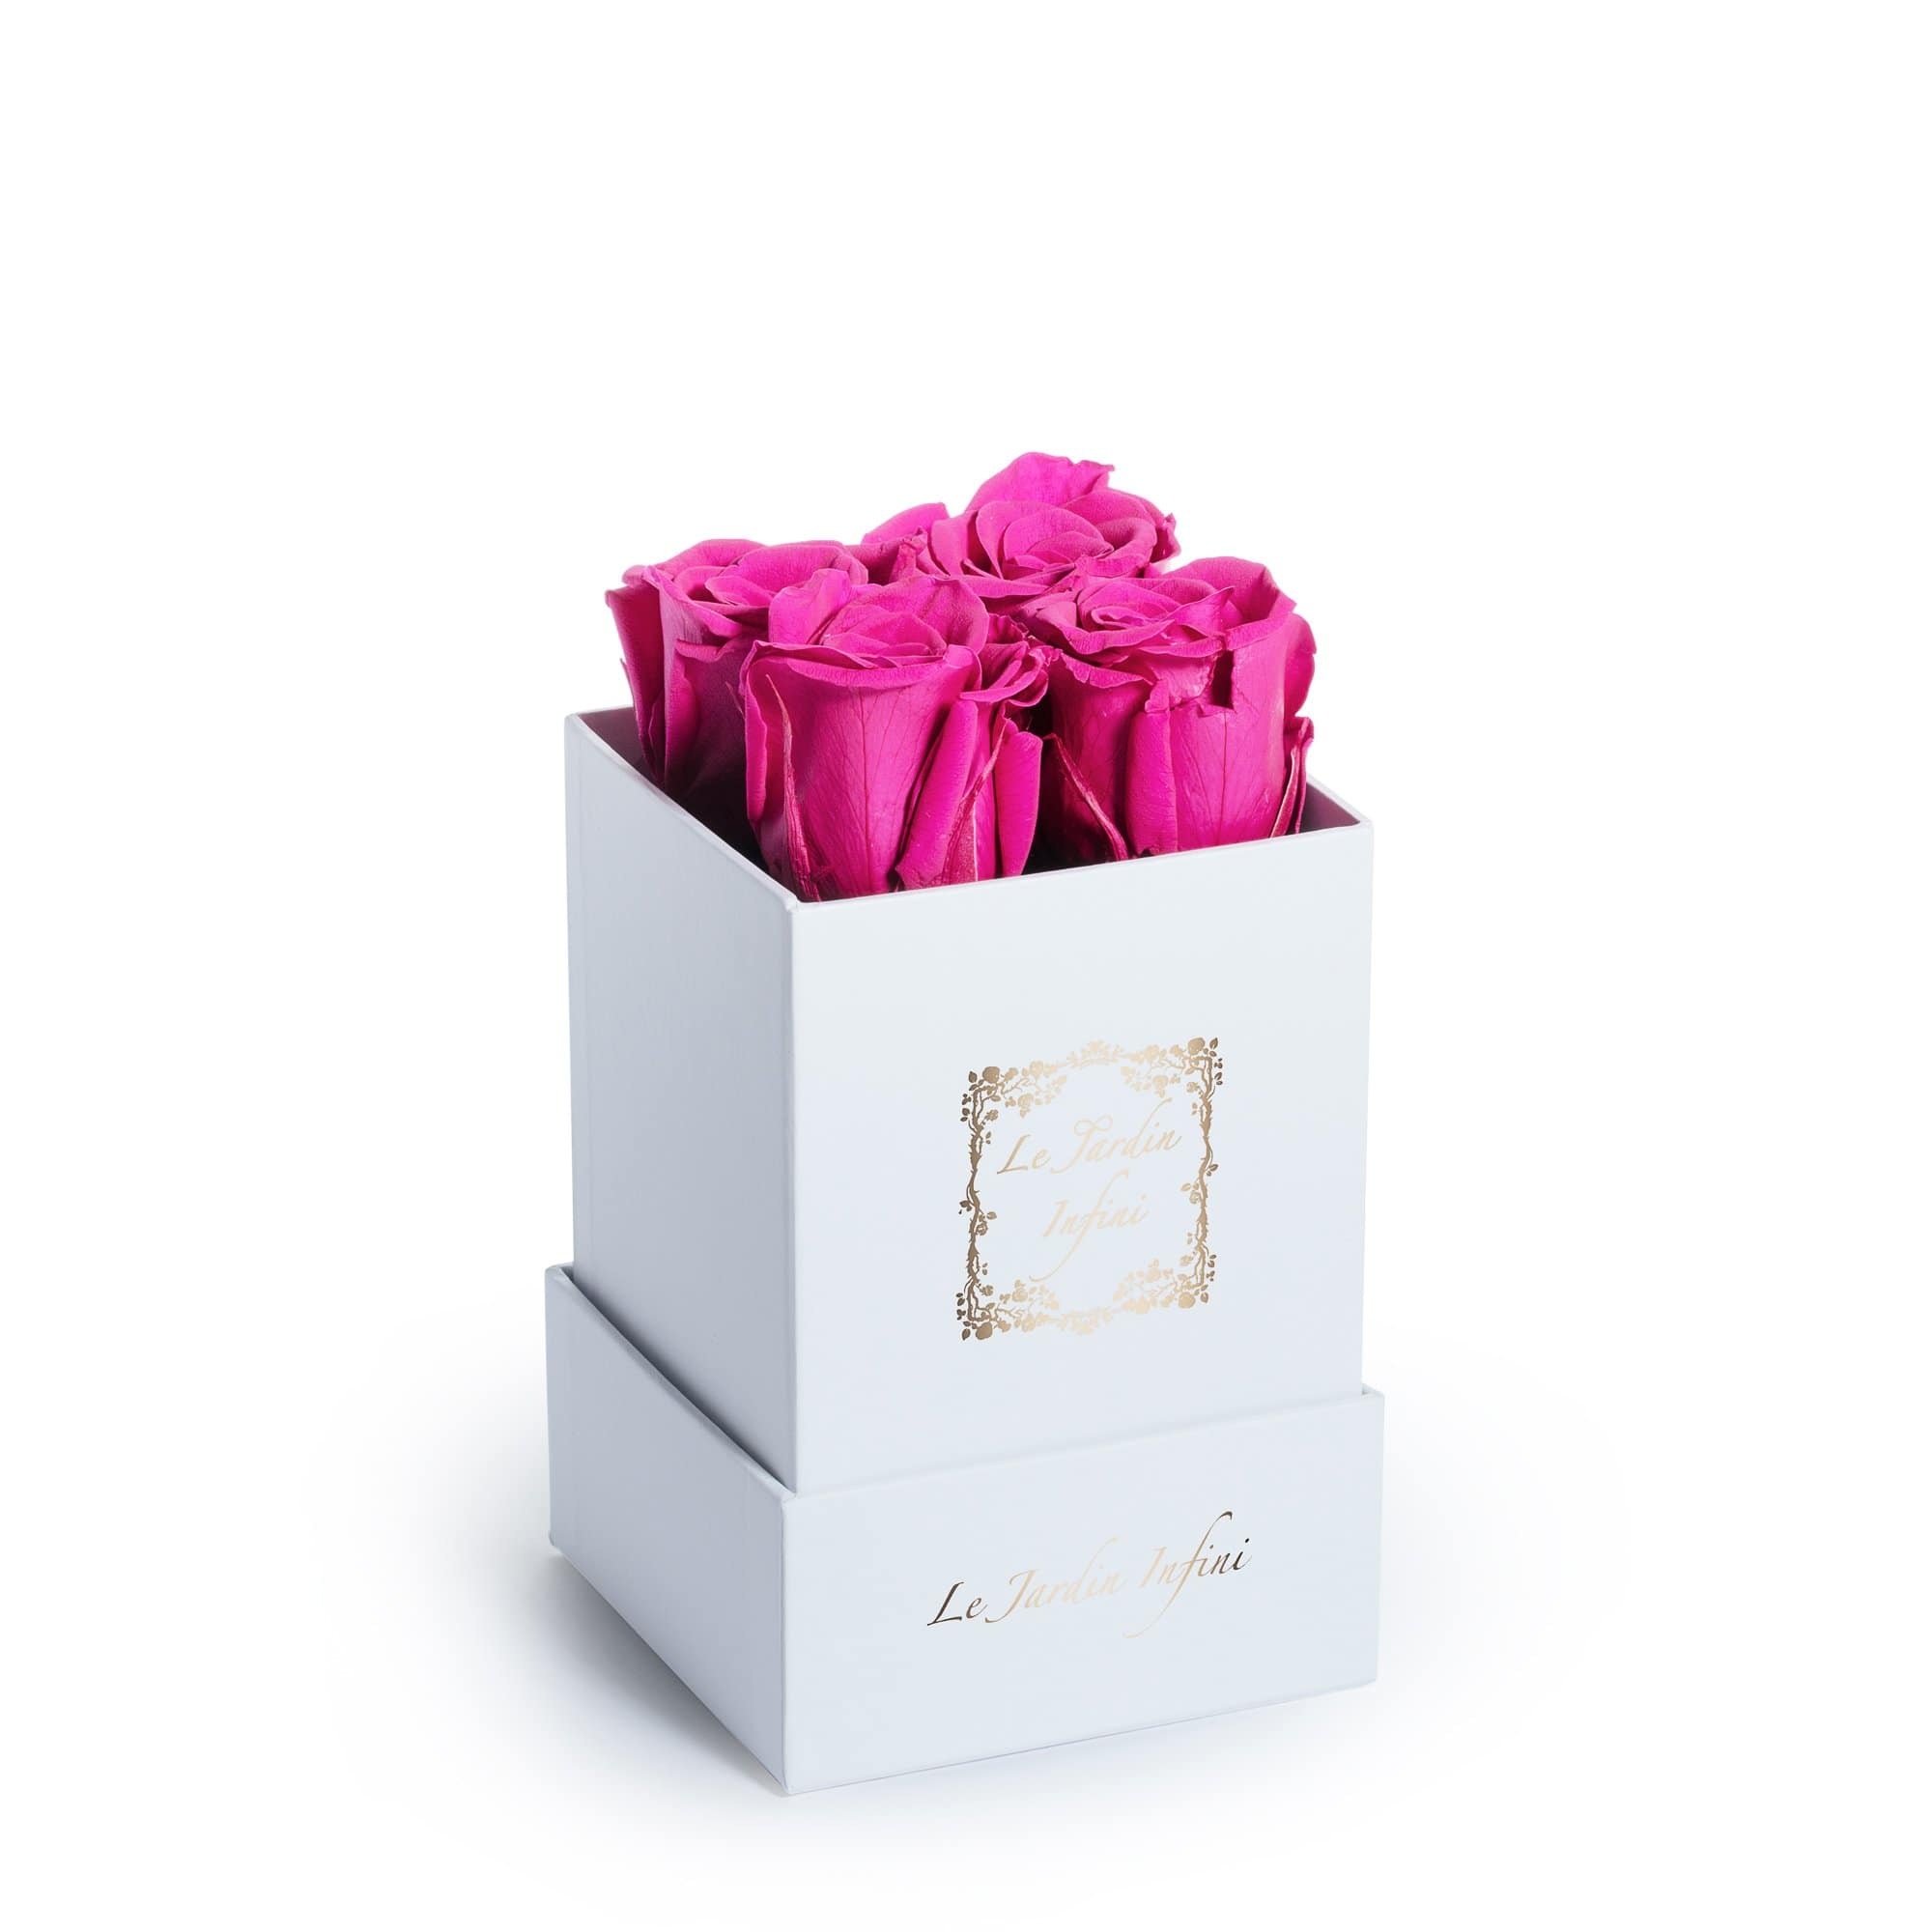 Hot Pink Roses in a box - Small Square White Box - Le Jardin Infini Roses in a Box